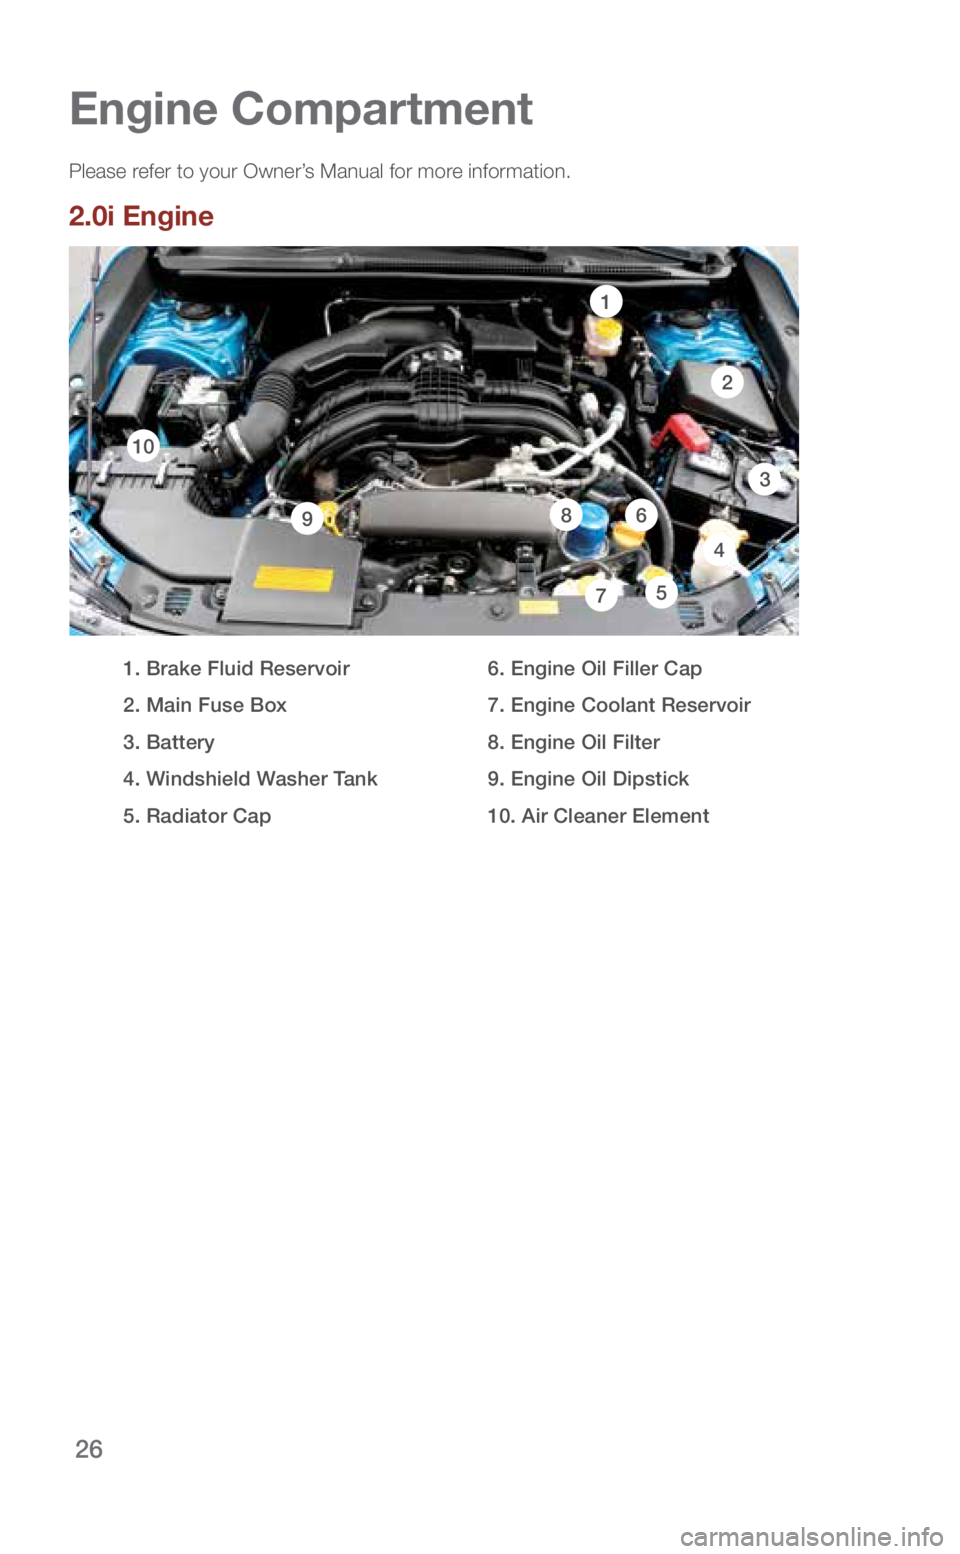 SUBARU IMPREZA 2018  Quick Guide 26
Engine Compartment
Additional
Information
Please refer to your Owner’s Manual for more information. 
2.0i Engine
  1. Brake Fluid Reservoir
  2. Main Fuse Box
  3. Battery
  4.  Windshield Washer